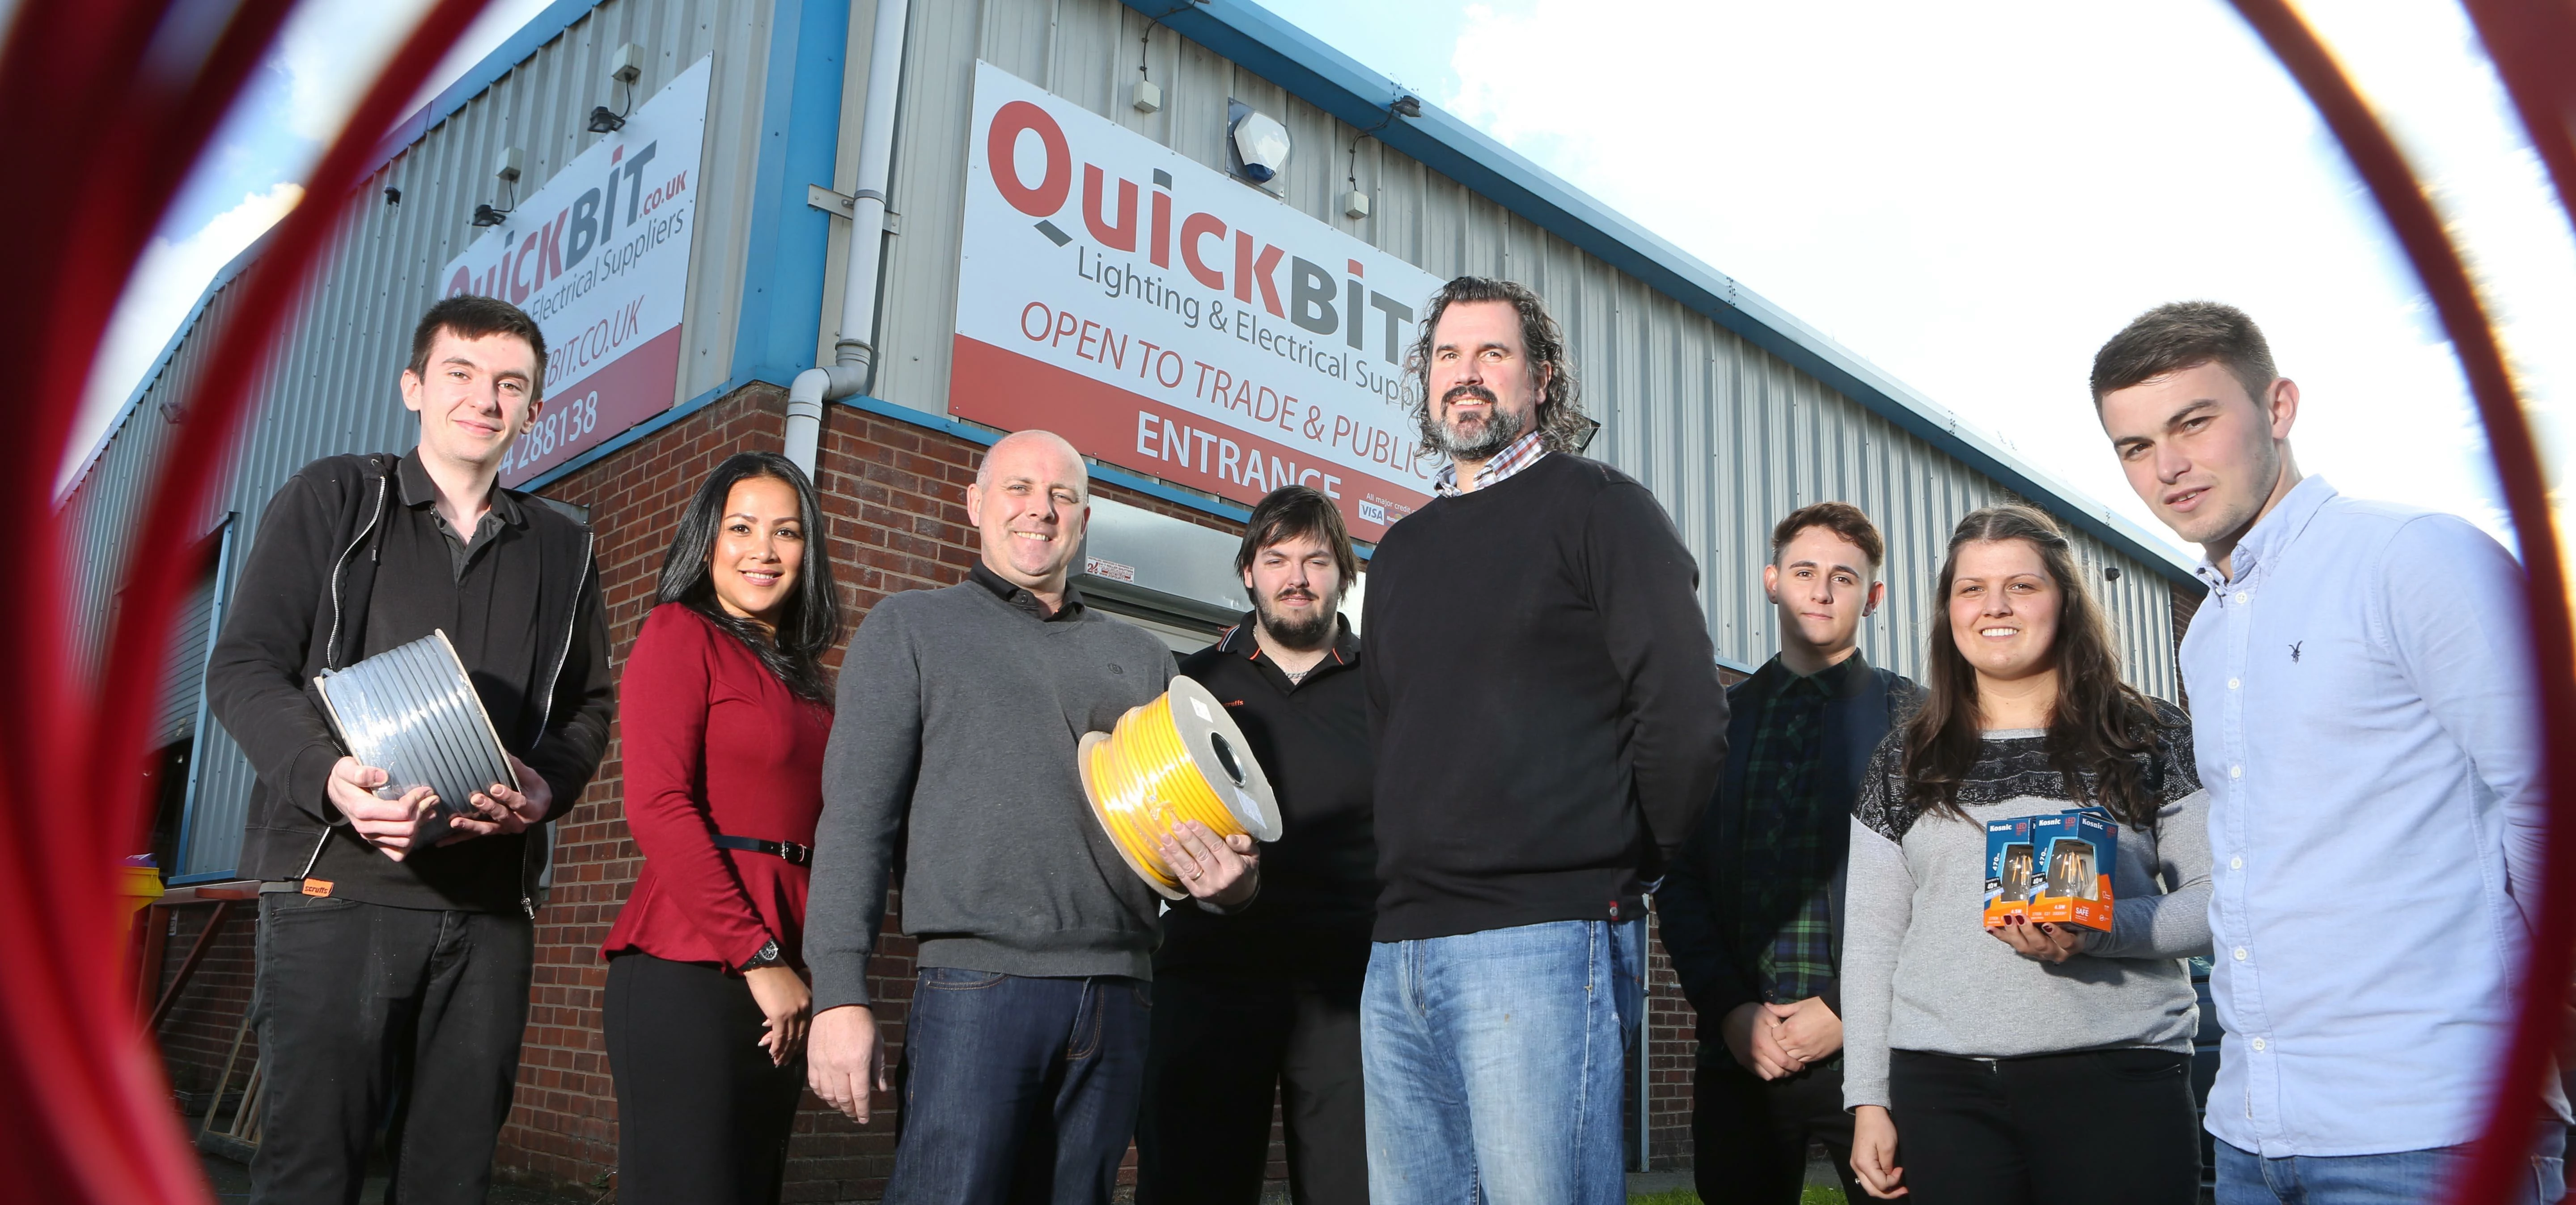 Stuart and Lee Guy with business partner David Baker (centre) and the Quickbit team at the Deeside I